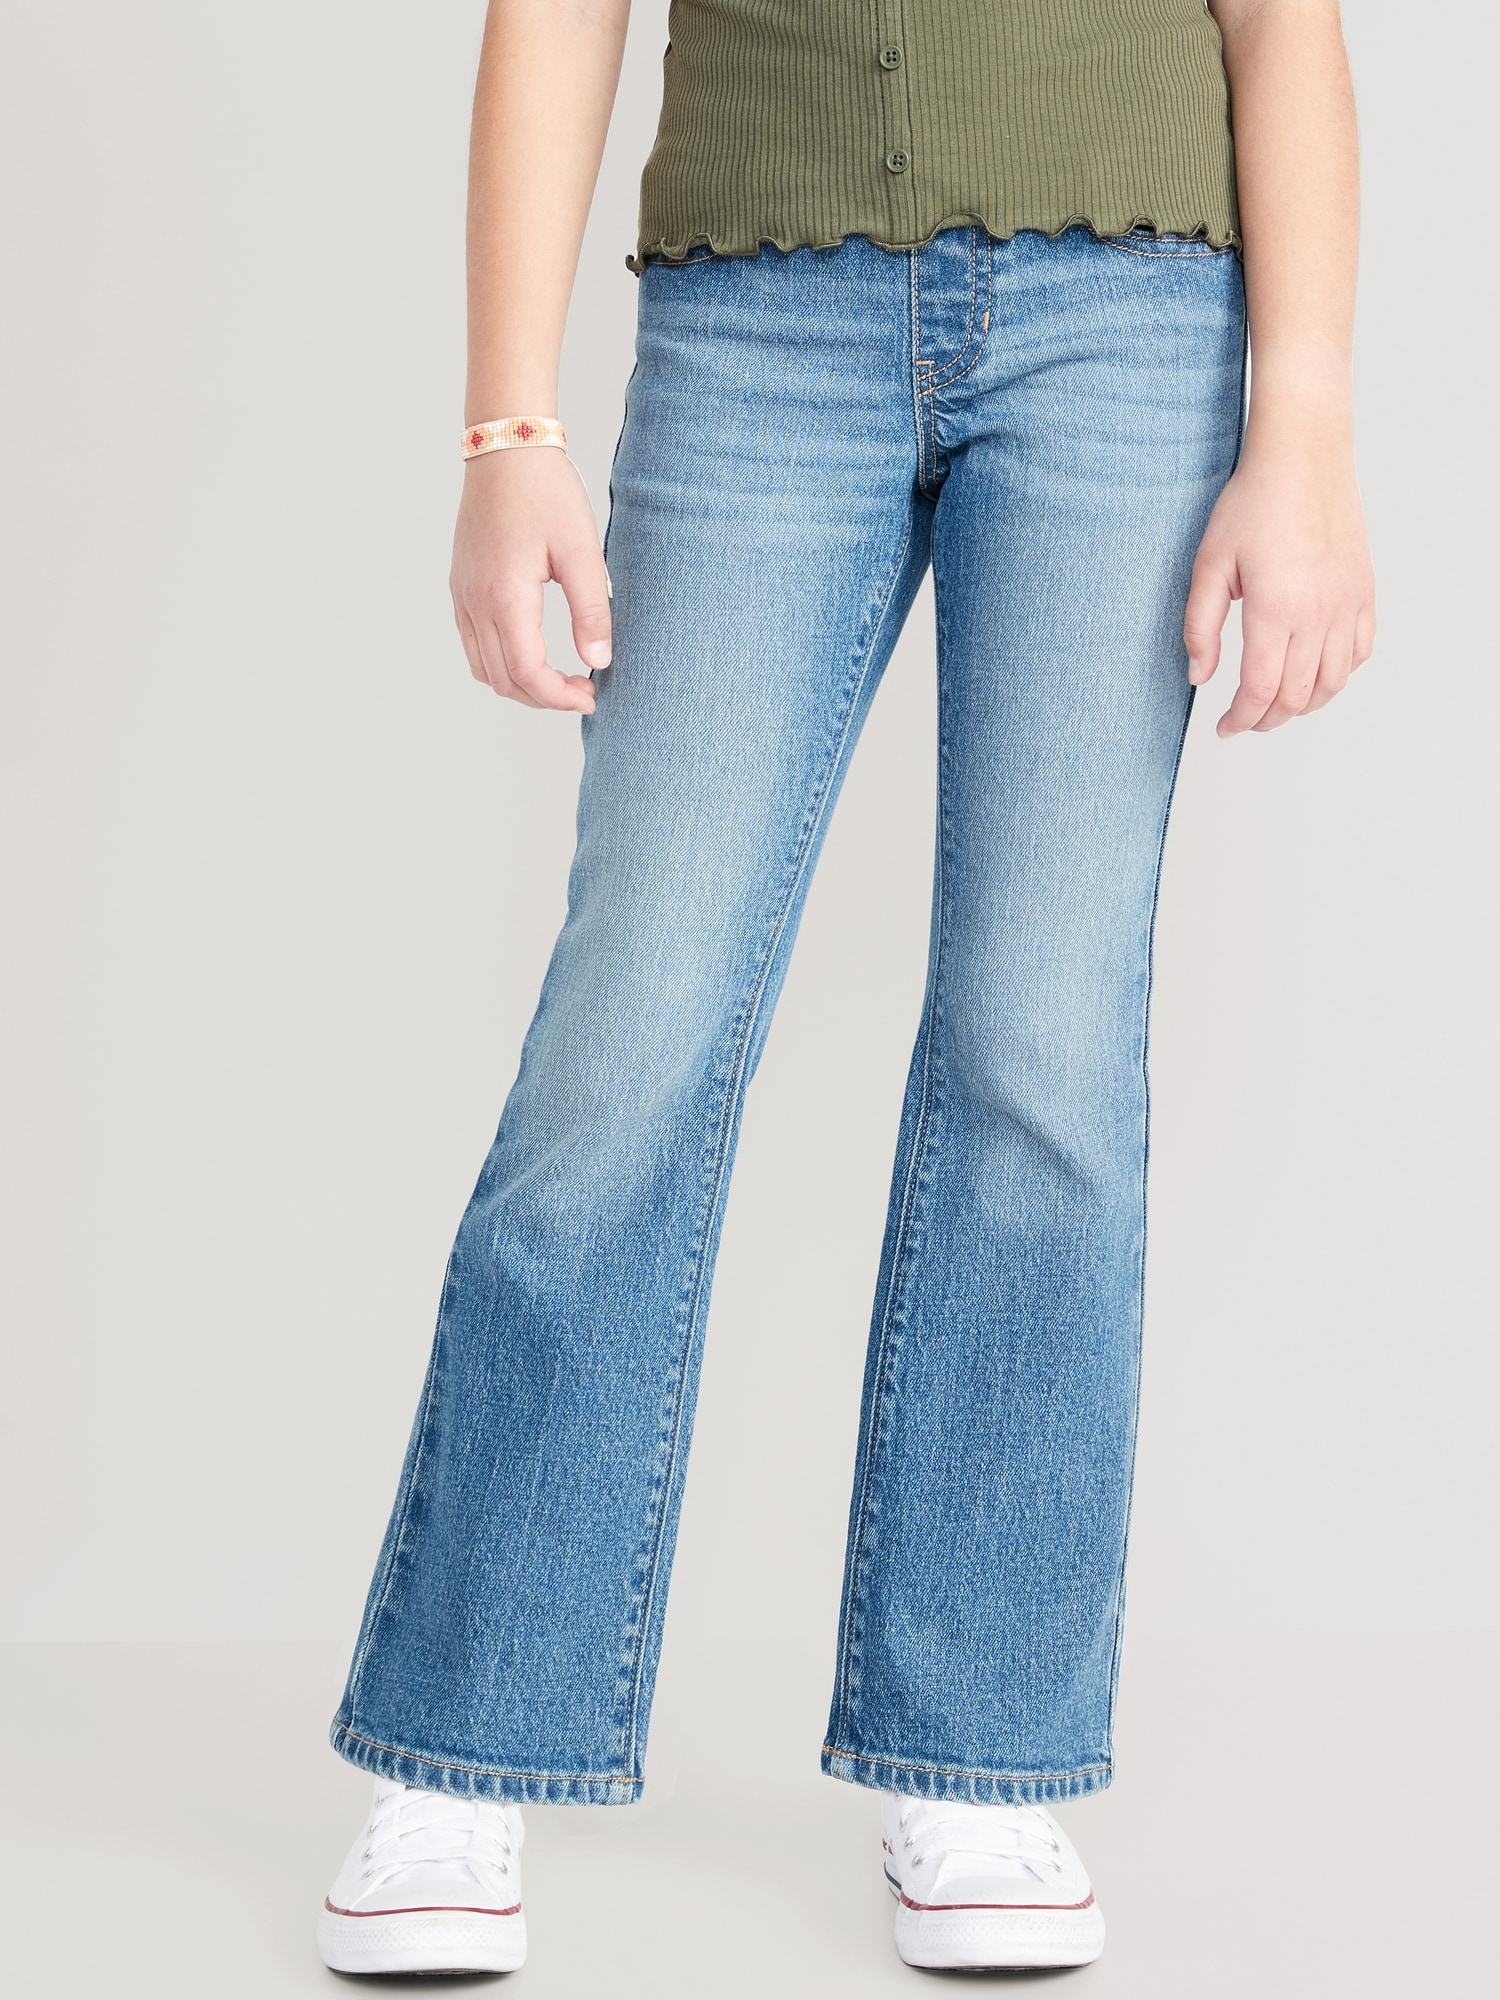 Wow Boot-Cut Pull-On Jeans for Girls Hot Deal